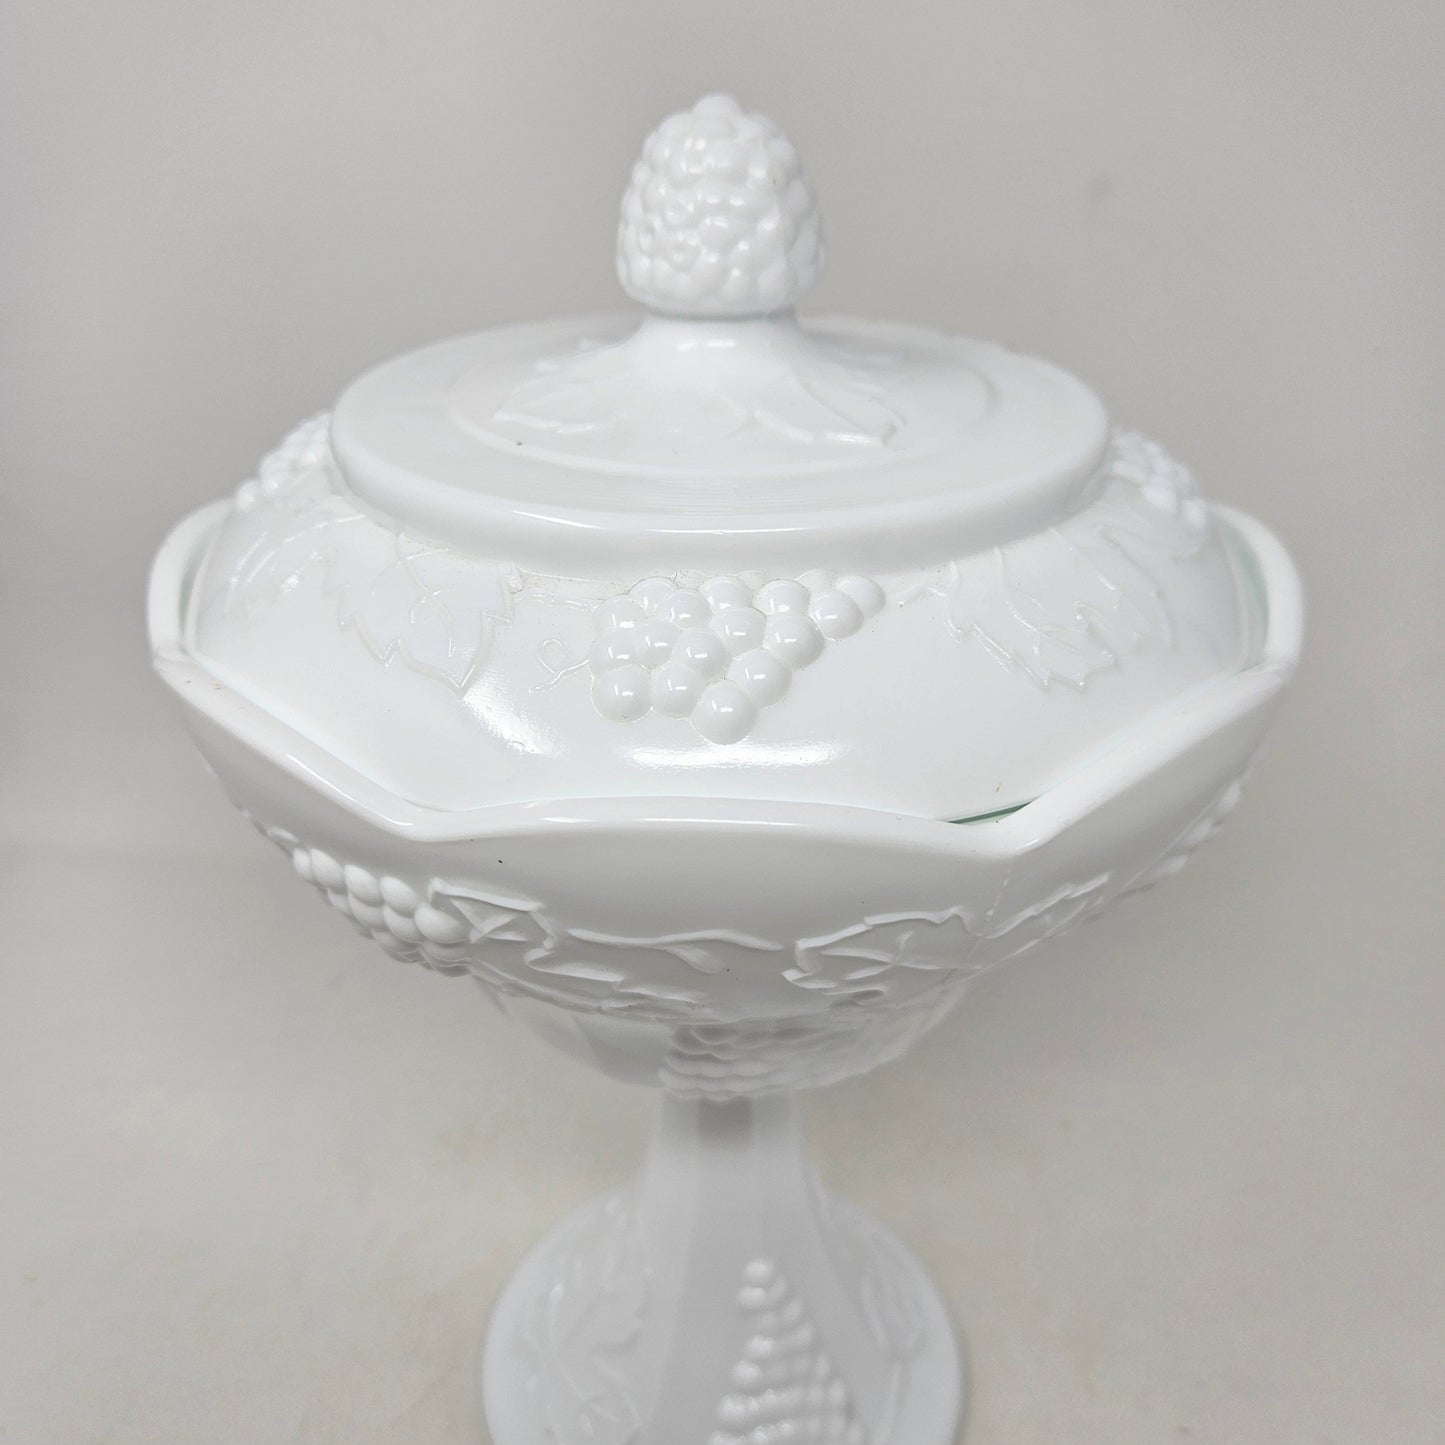 Compote / Wedding Bowl with Lid, Colony Harvest Milk Glass, Embossed Grapes, Vintage